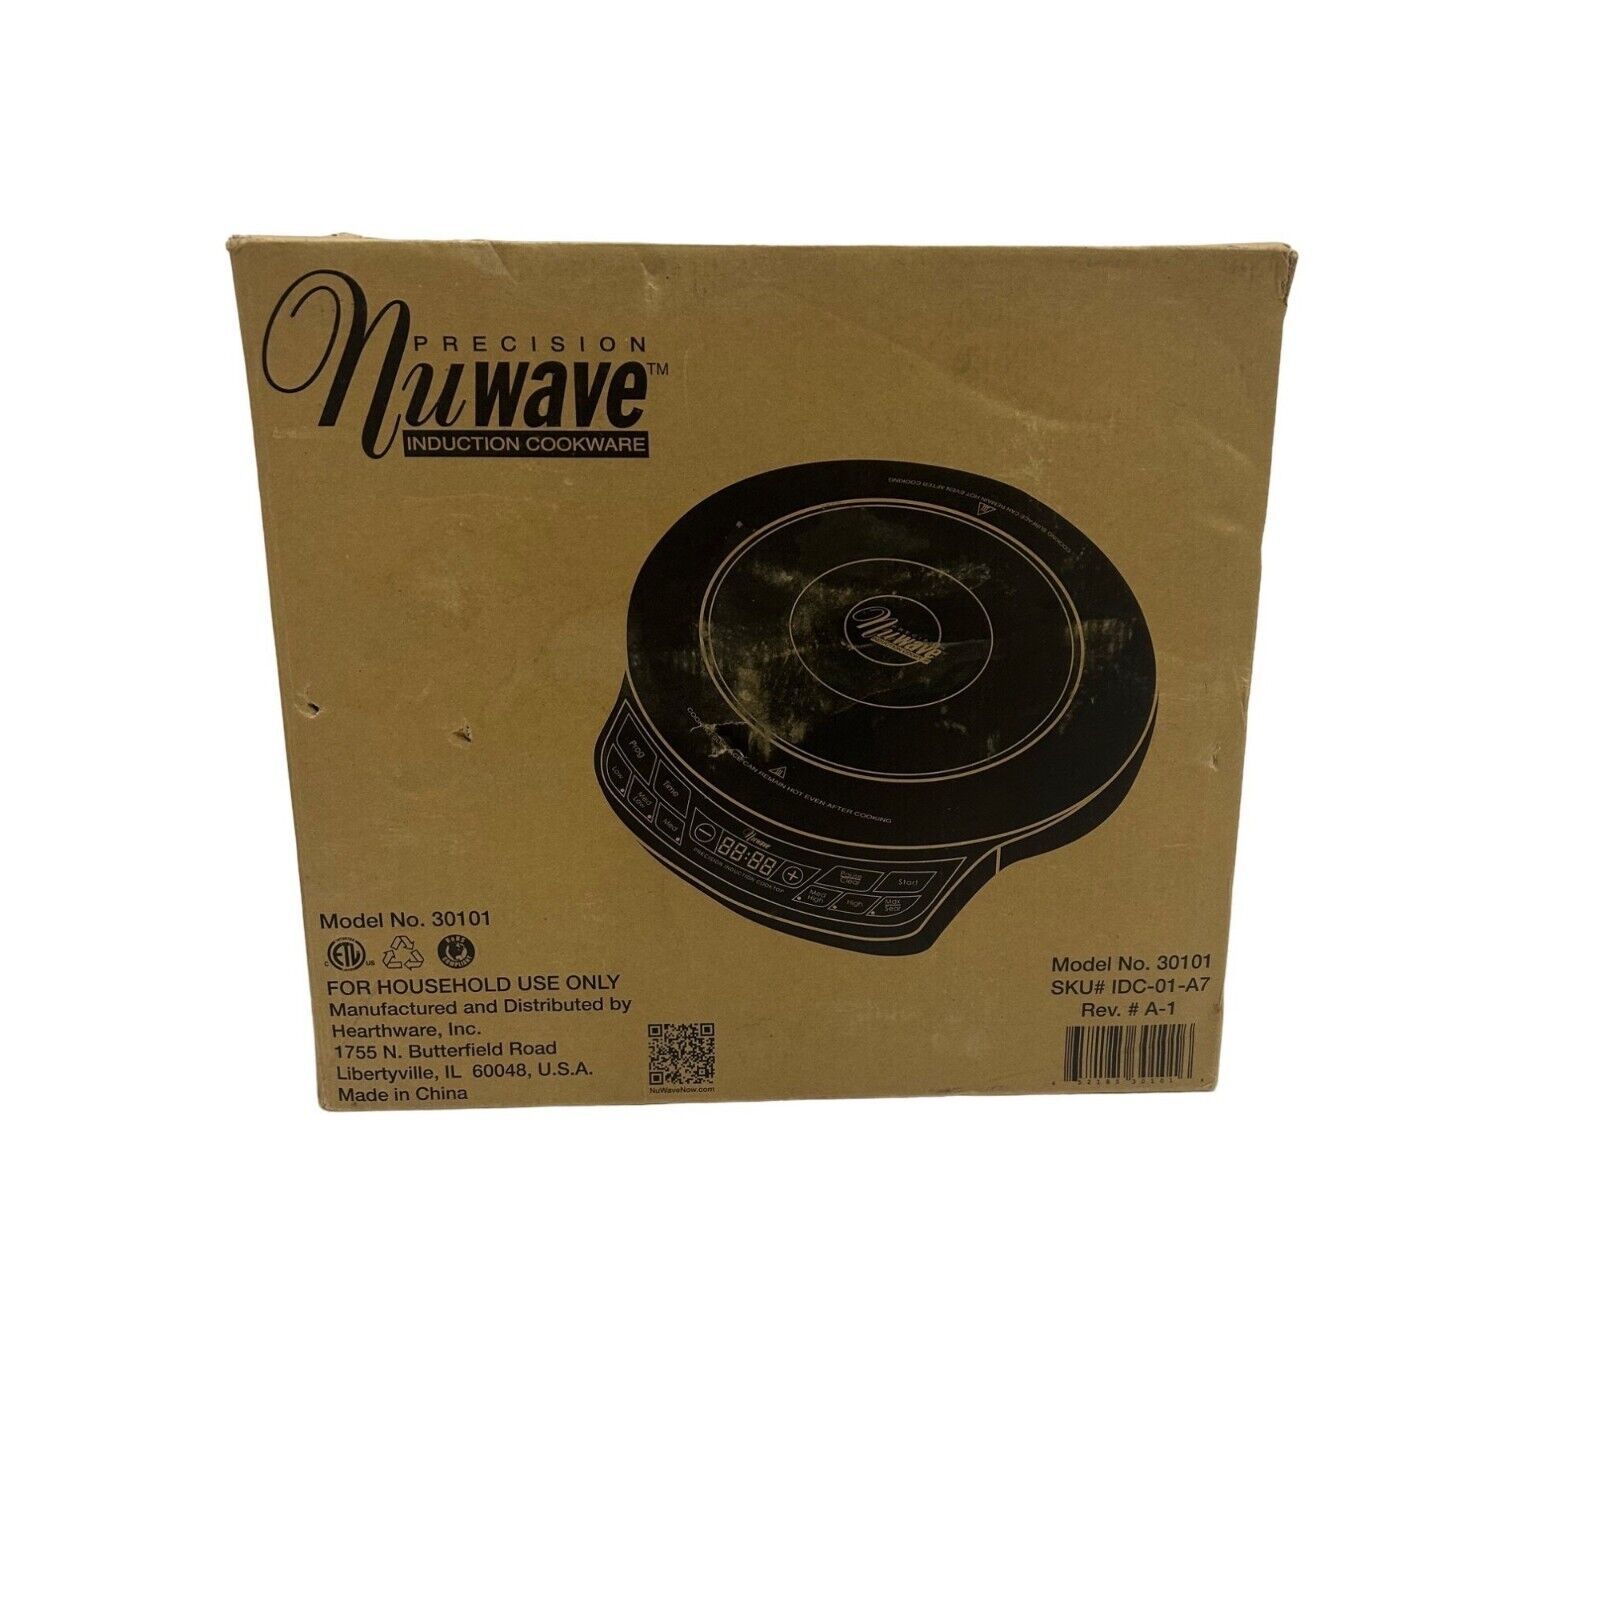 Nuwave Precision Induction Cookware Cooktop Model 30101 Brand New In Box - $64.99